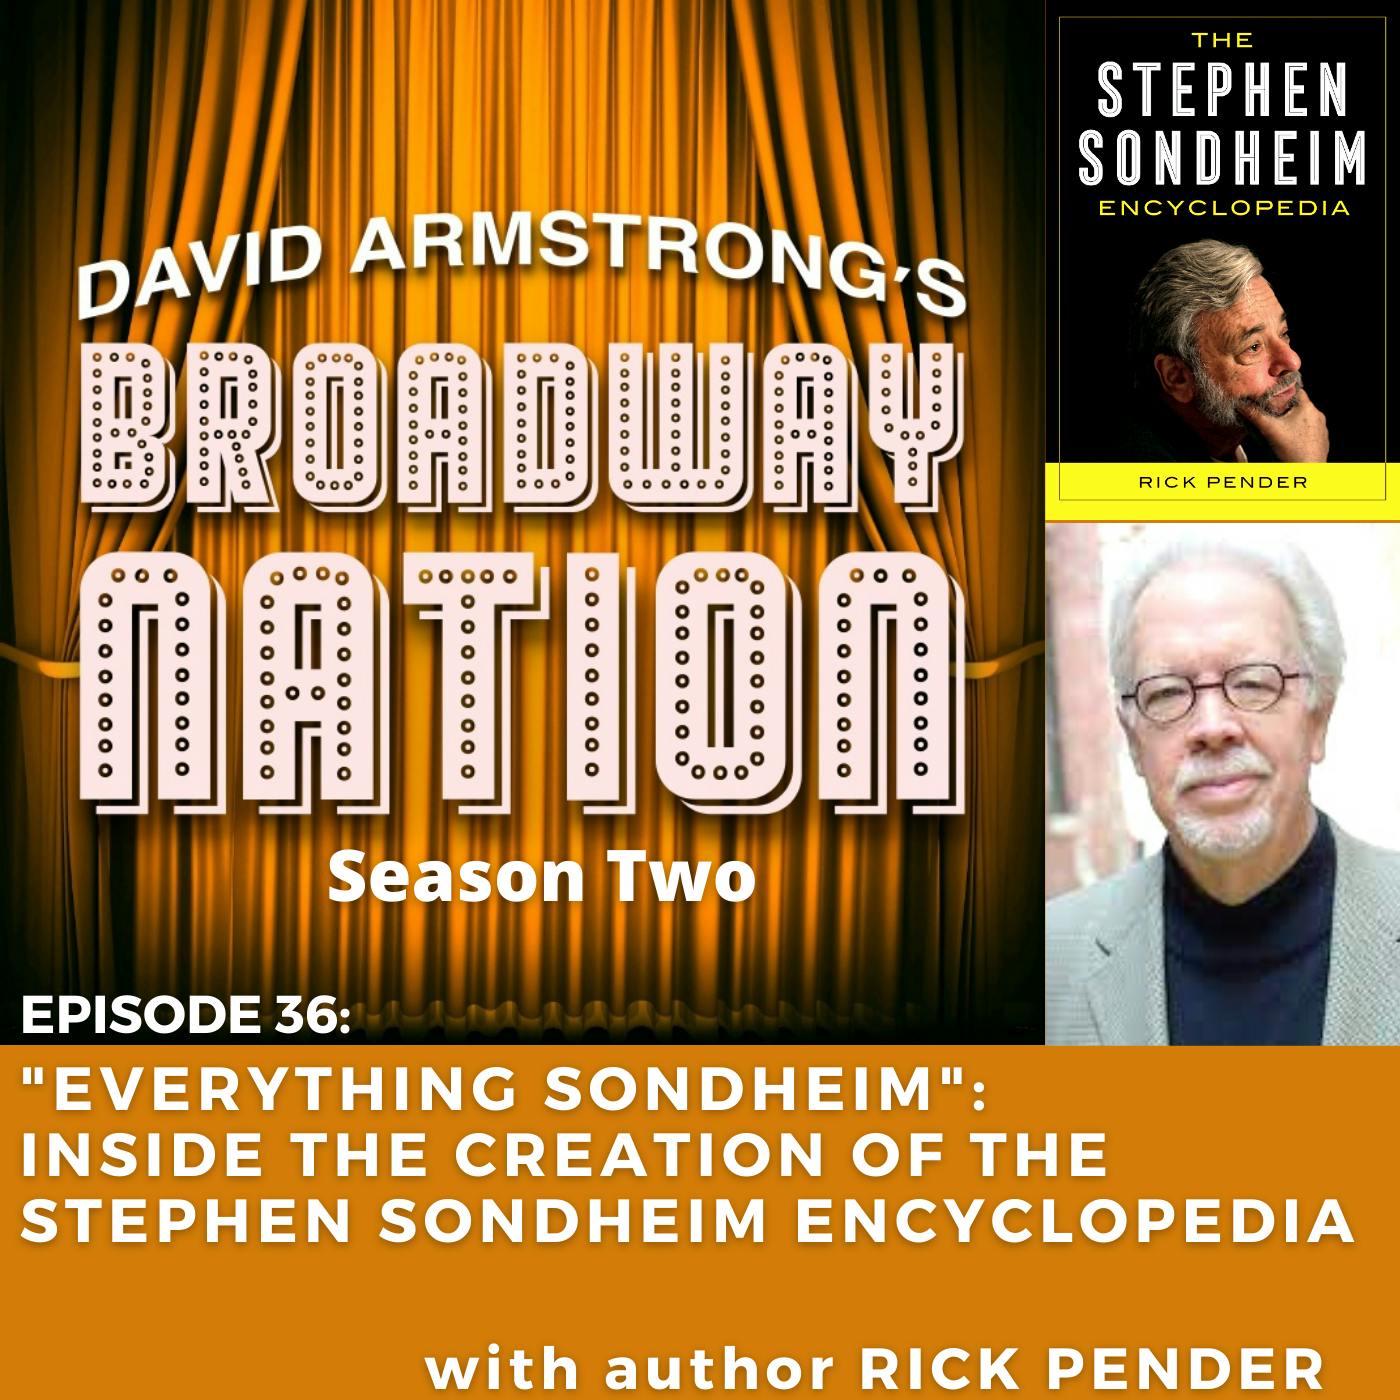 Episode 36: Everything Sondheim: Inside the Creation of The Stephen Sondheim Encyclopedia with author Rick Pender